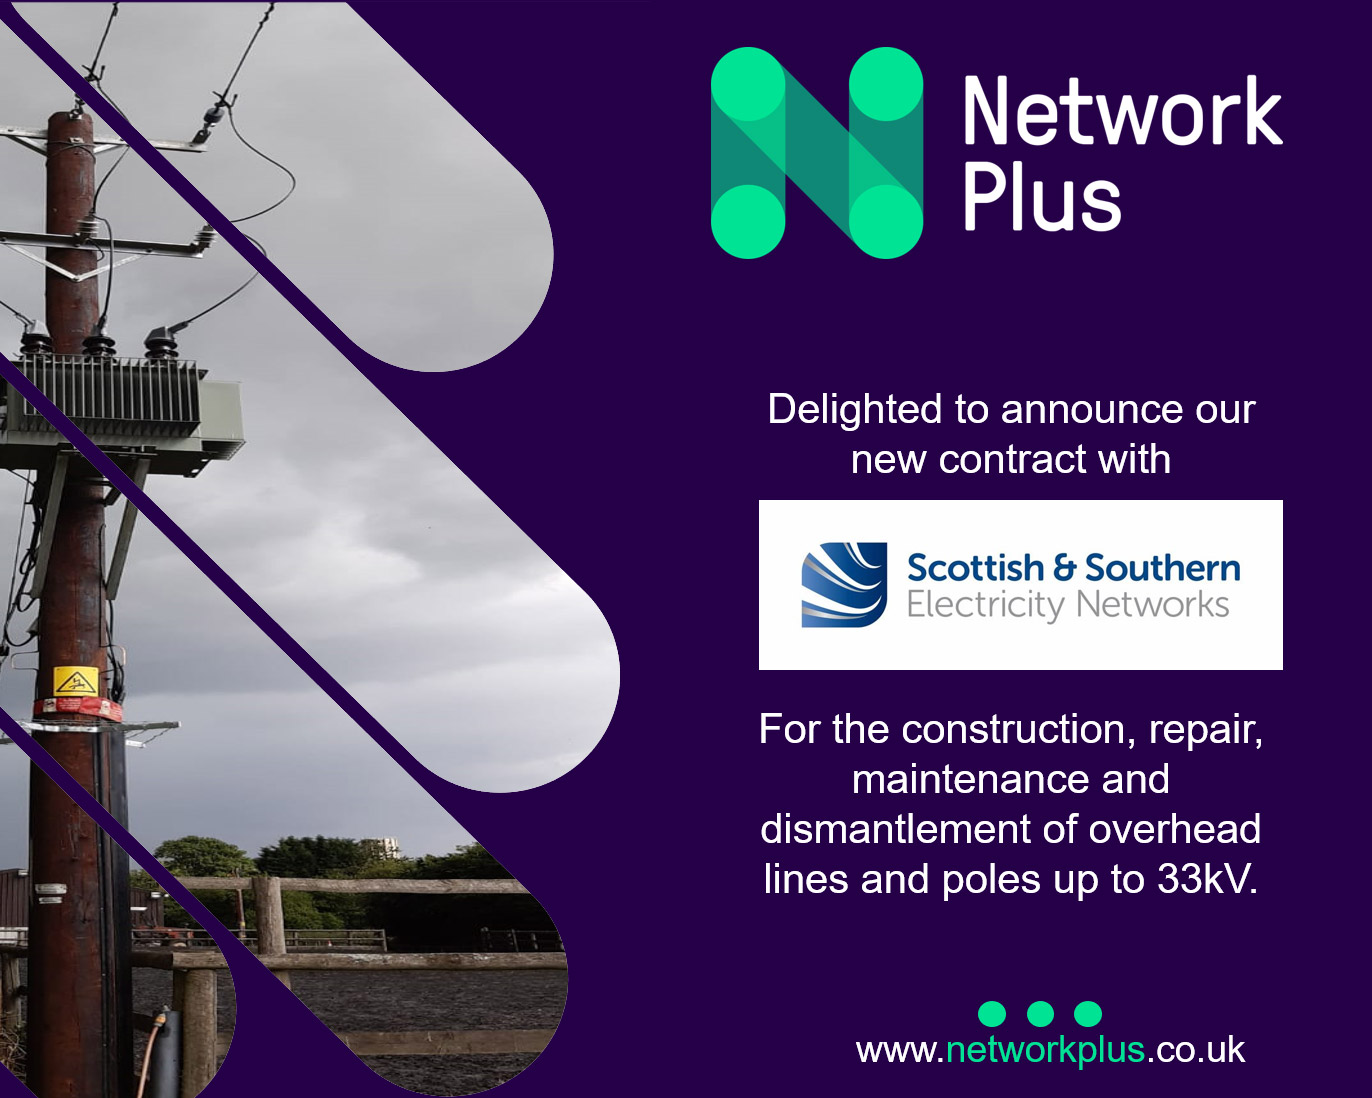 contract with scottish & southern electricity networks